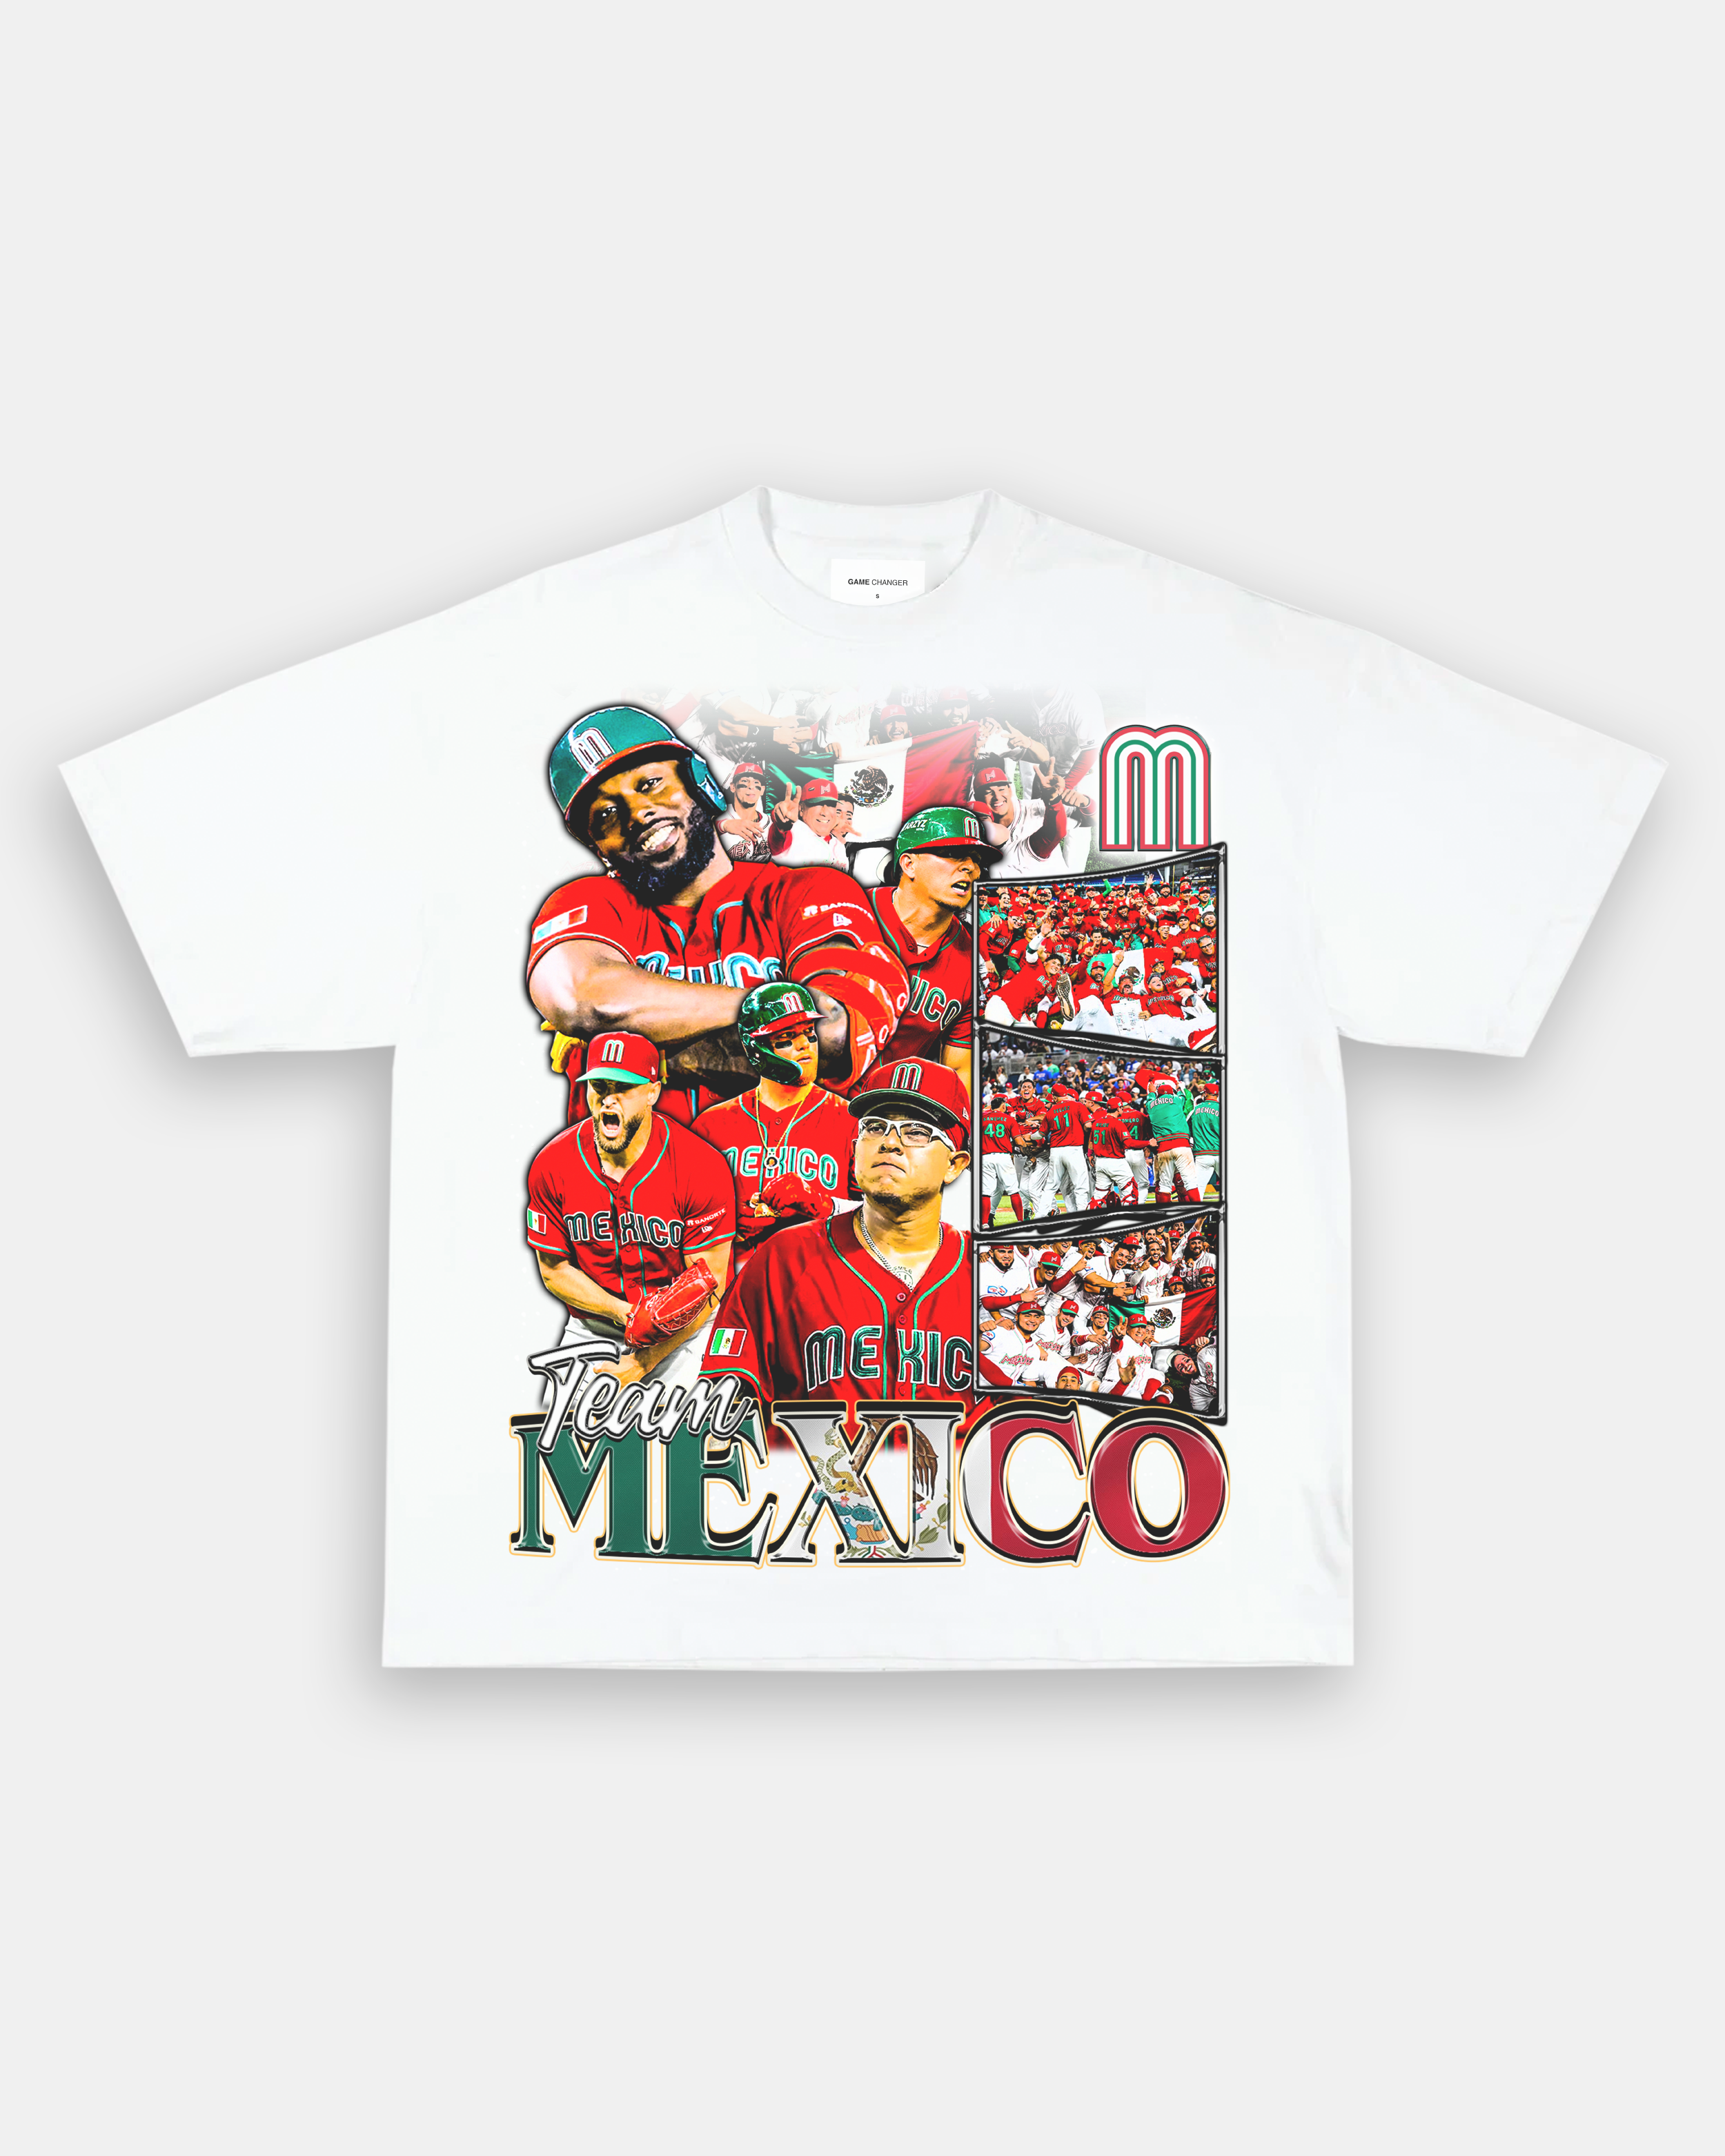 Is Team Mexico jersey in WBC inspired by a popular song? Exploring